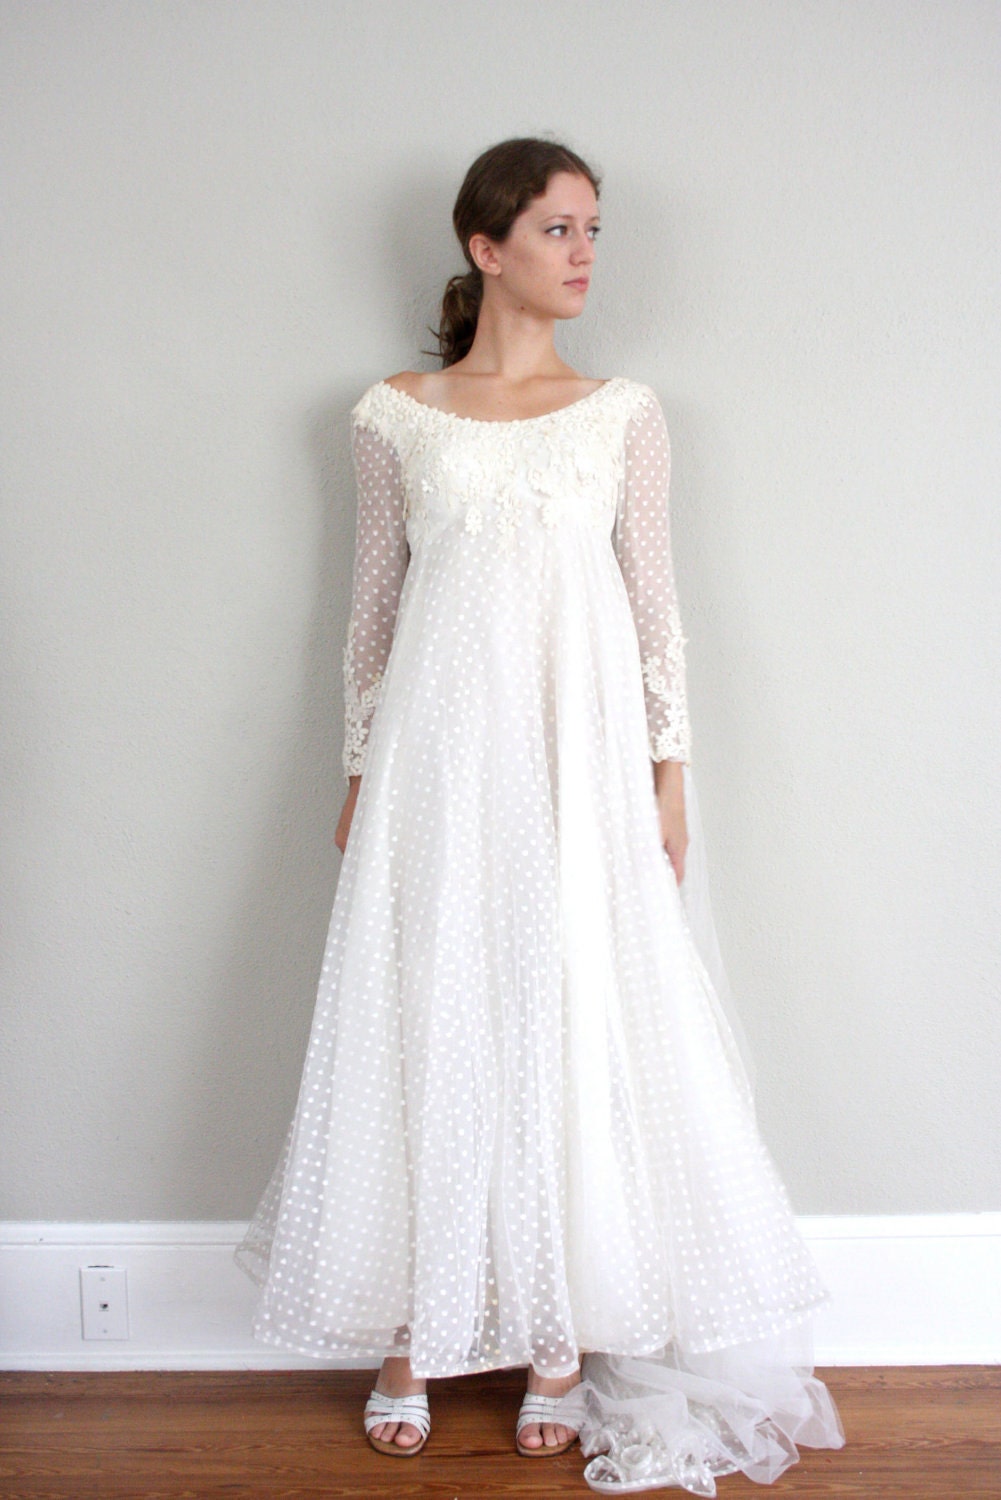 Vintage 1950s Wedding Dress in White Polka Dot Sheer Lace and